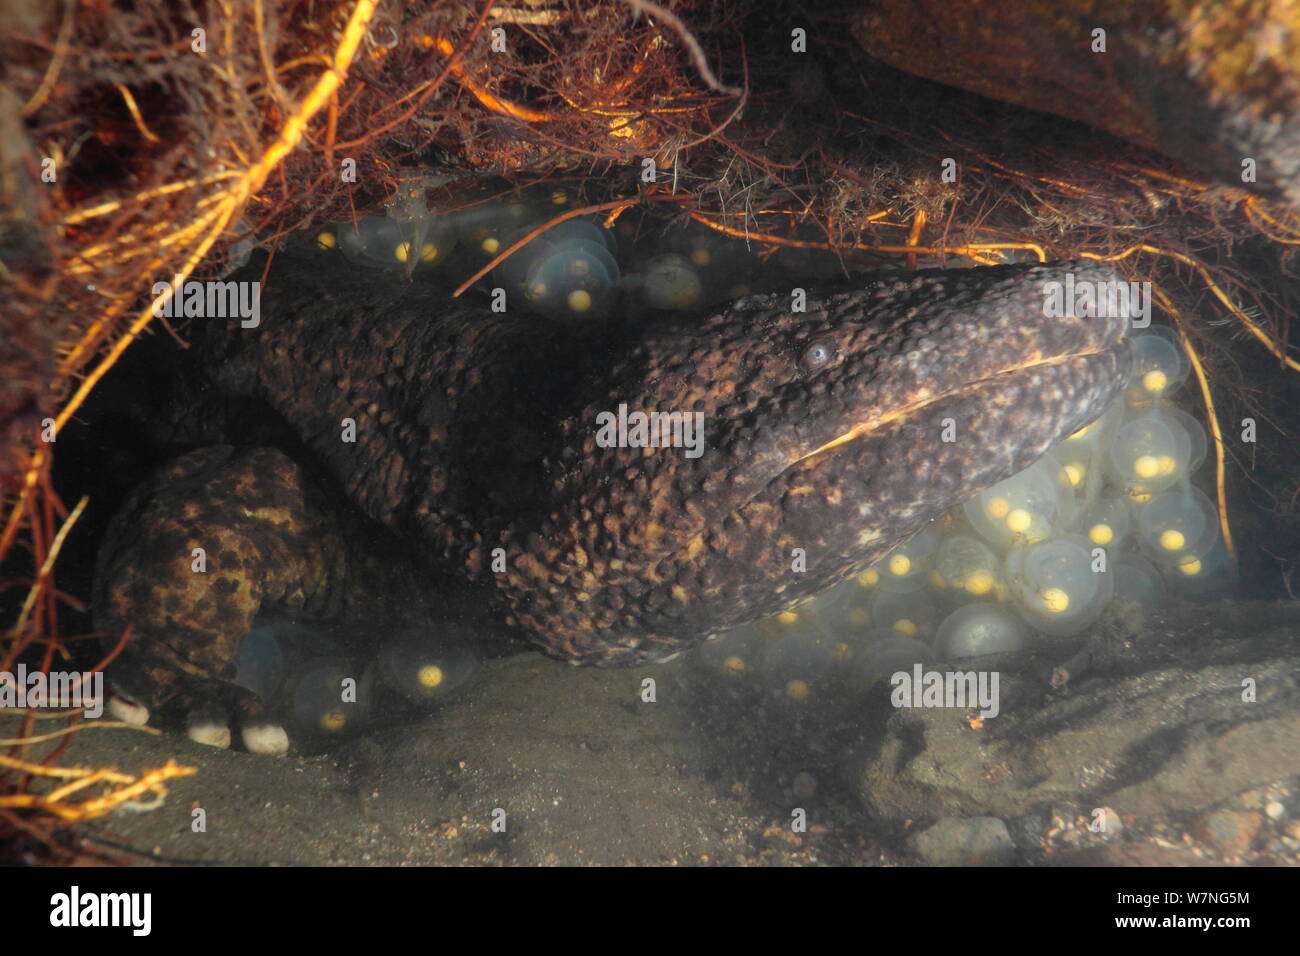 Male Japanese giant salamander (Andrias japonicus) protecting his eggs inside his nest, Japan, September Stock Photo